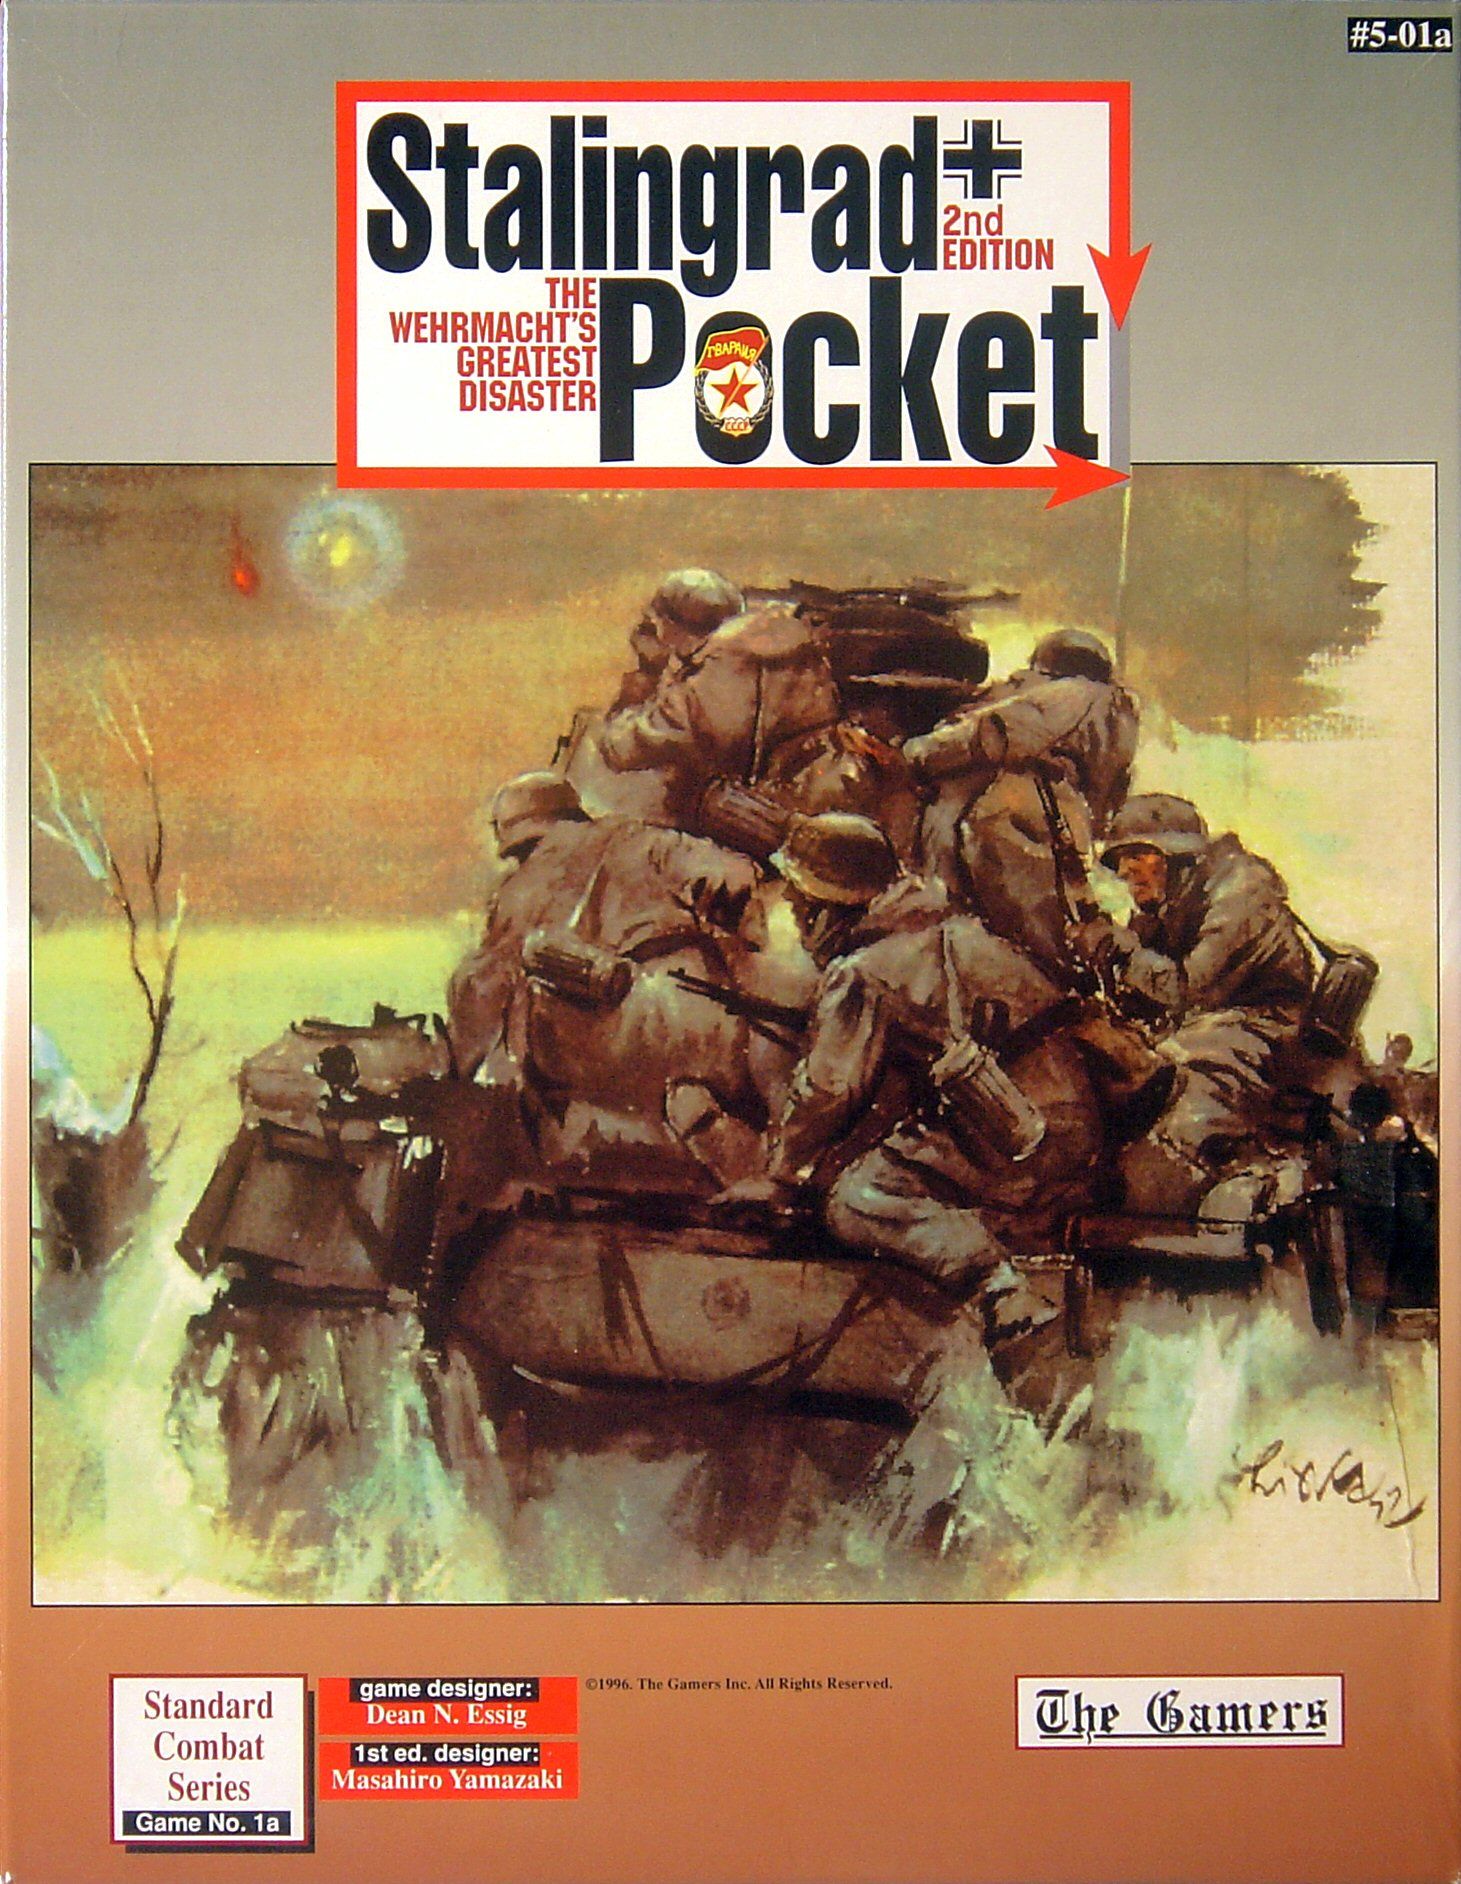 Stalingrad Pocket 2nd Edition: The Wehrmacht's Greatest Disaster